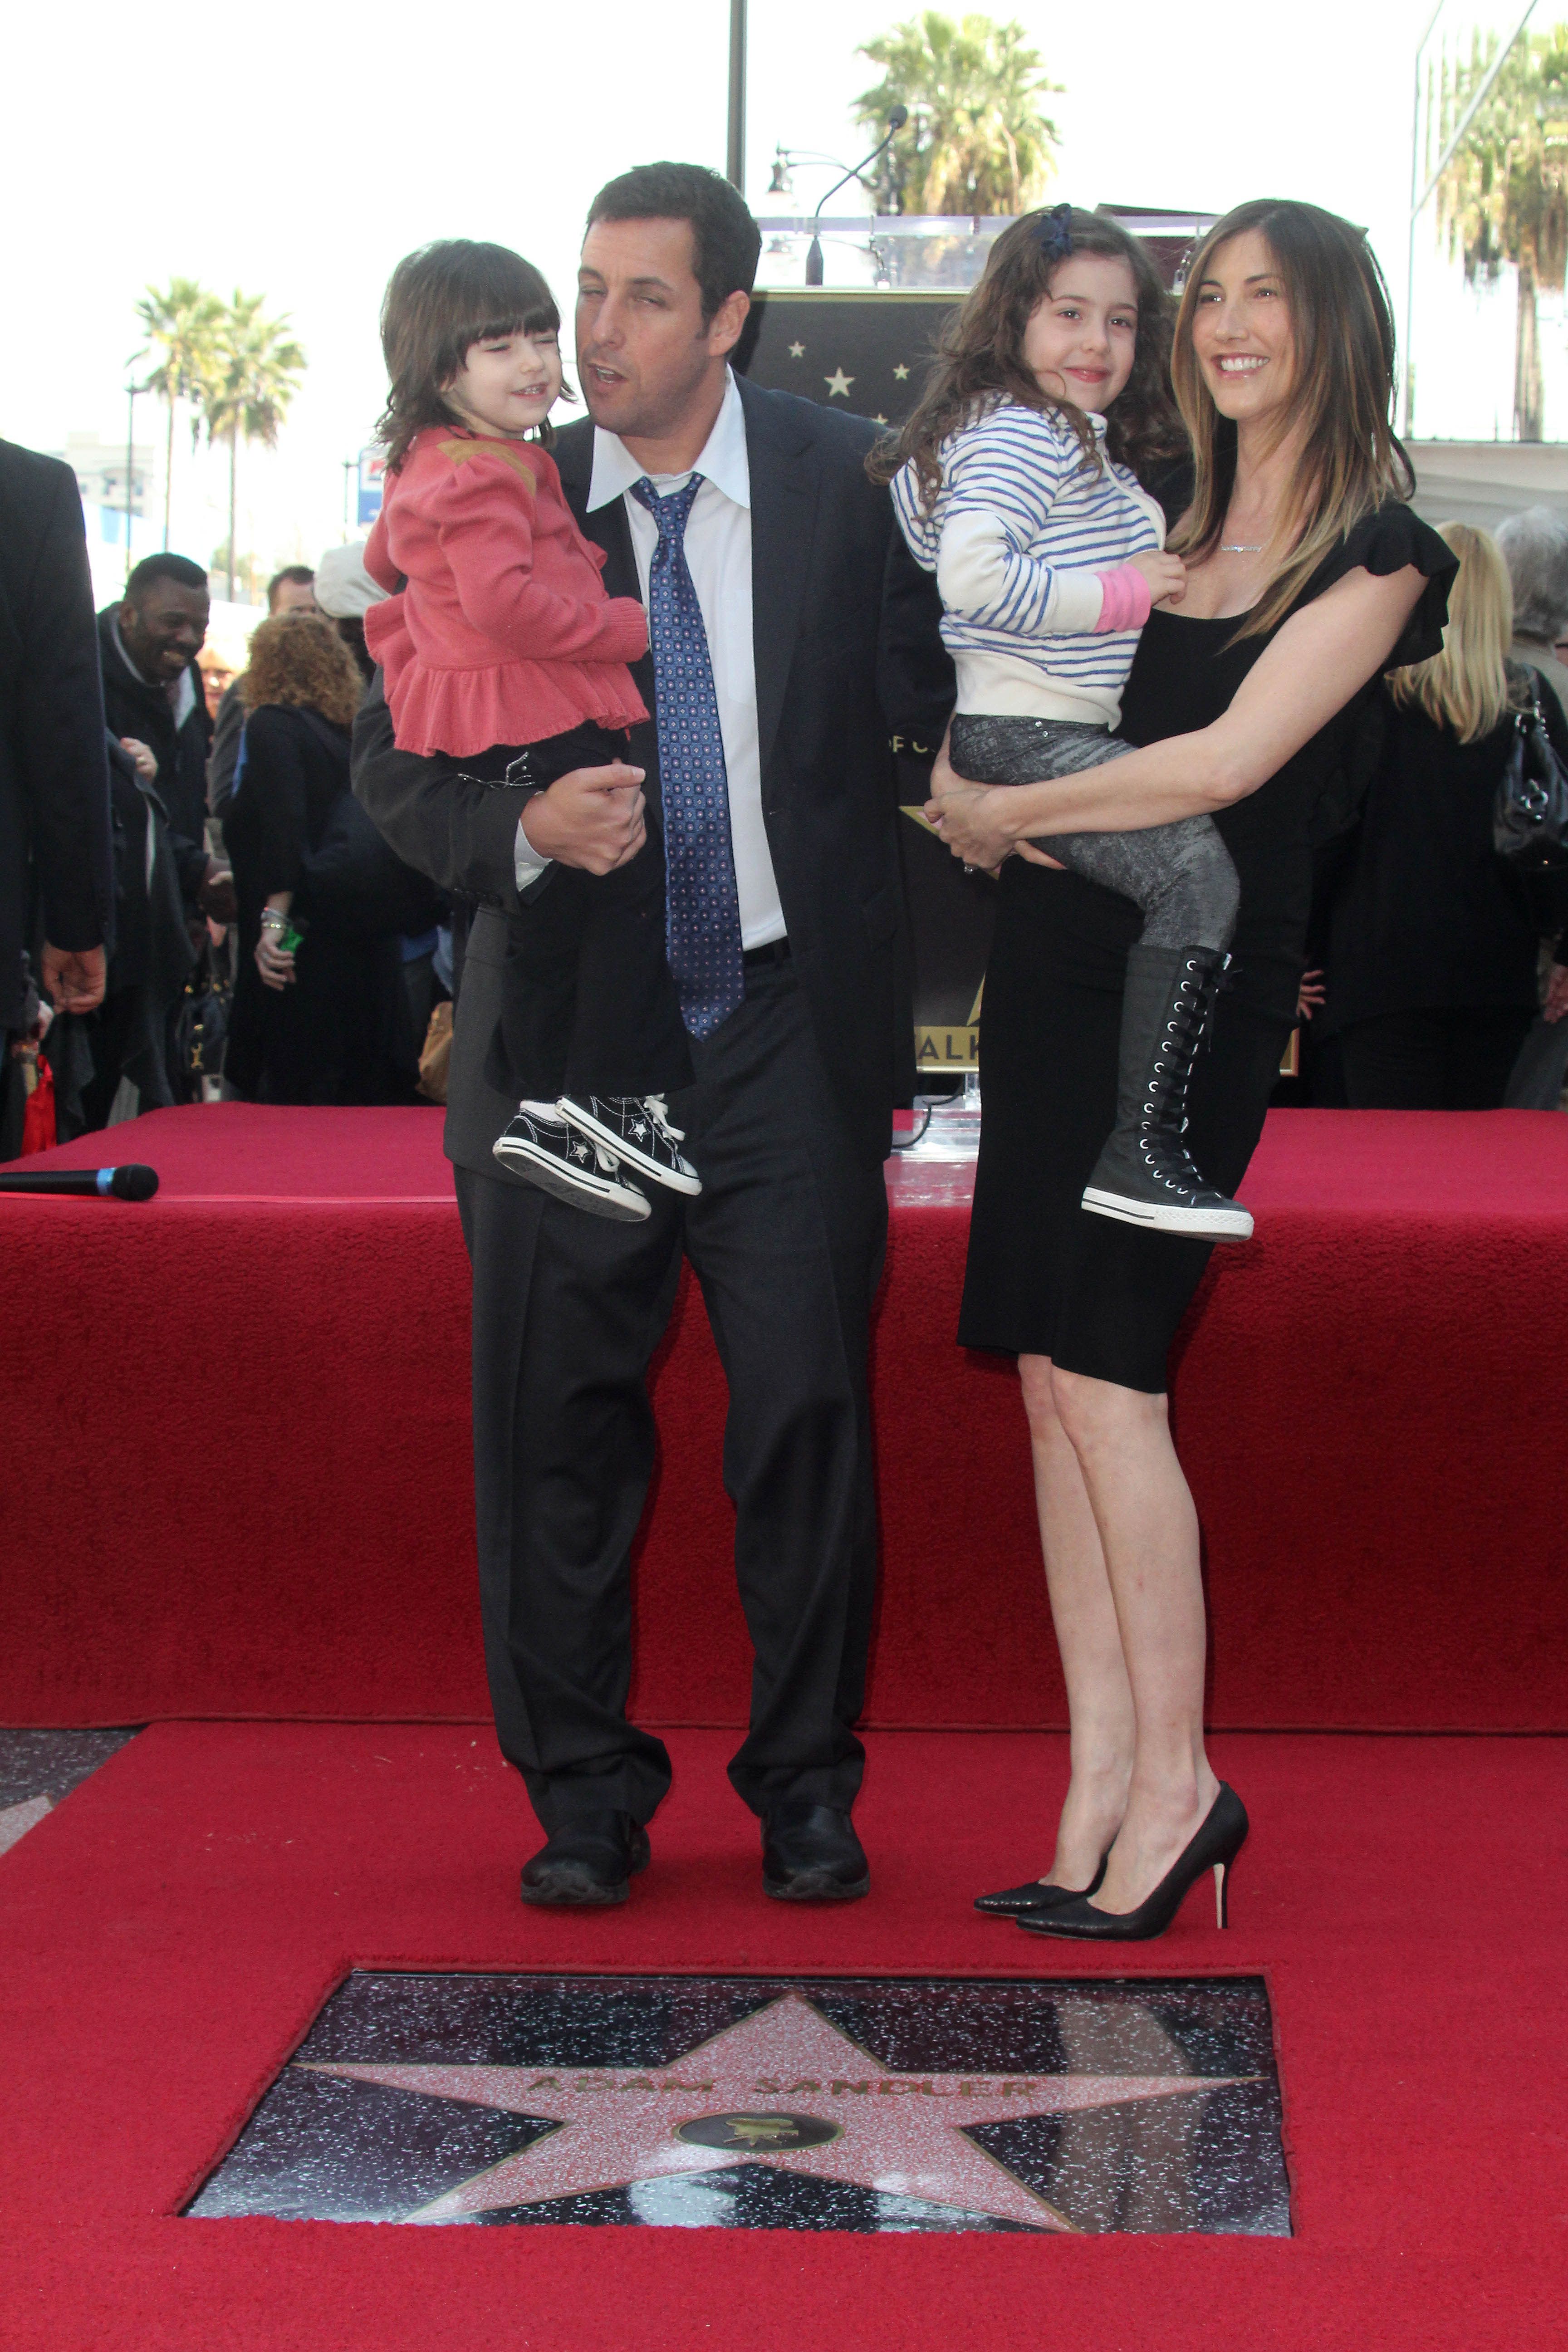 Adam and Jackie Sandler hold their two kids, Sunny and Sadie at his Walk of Fame star.